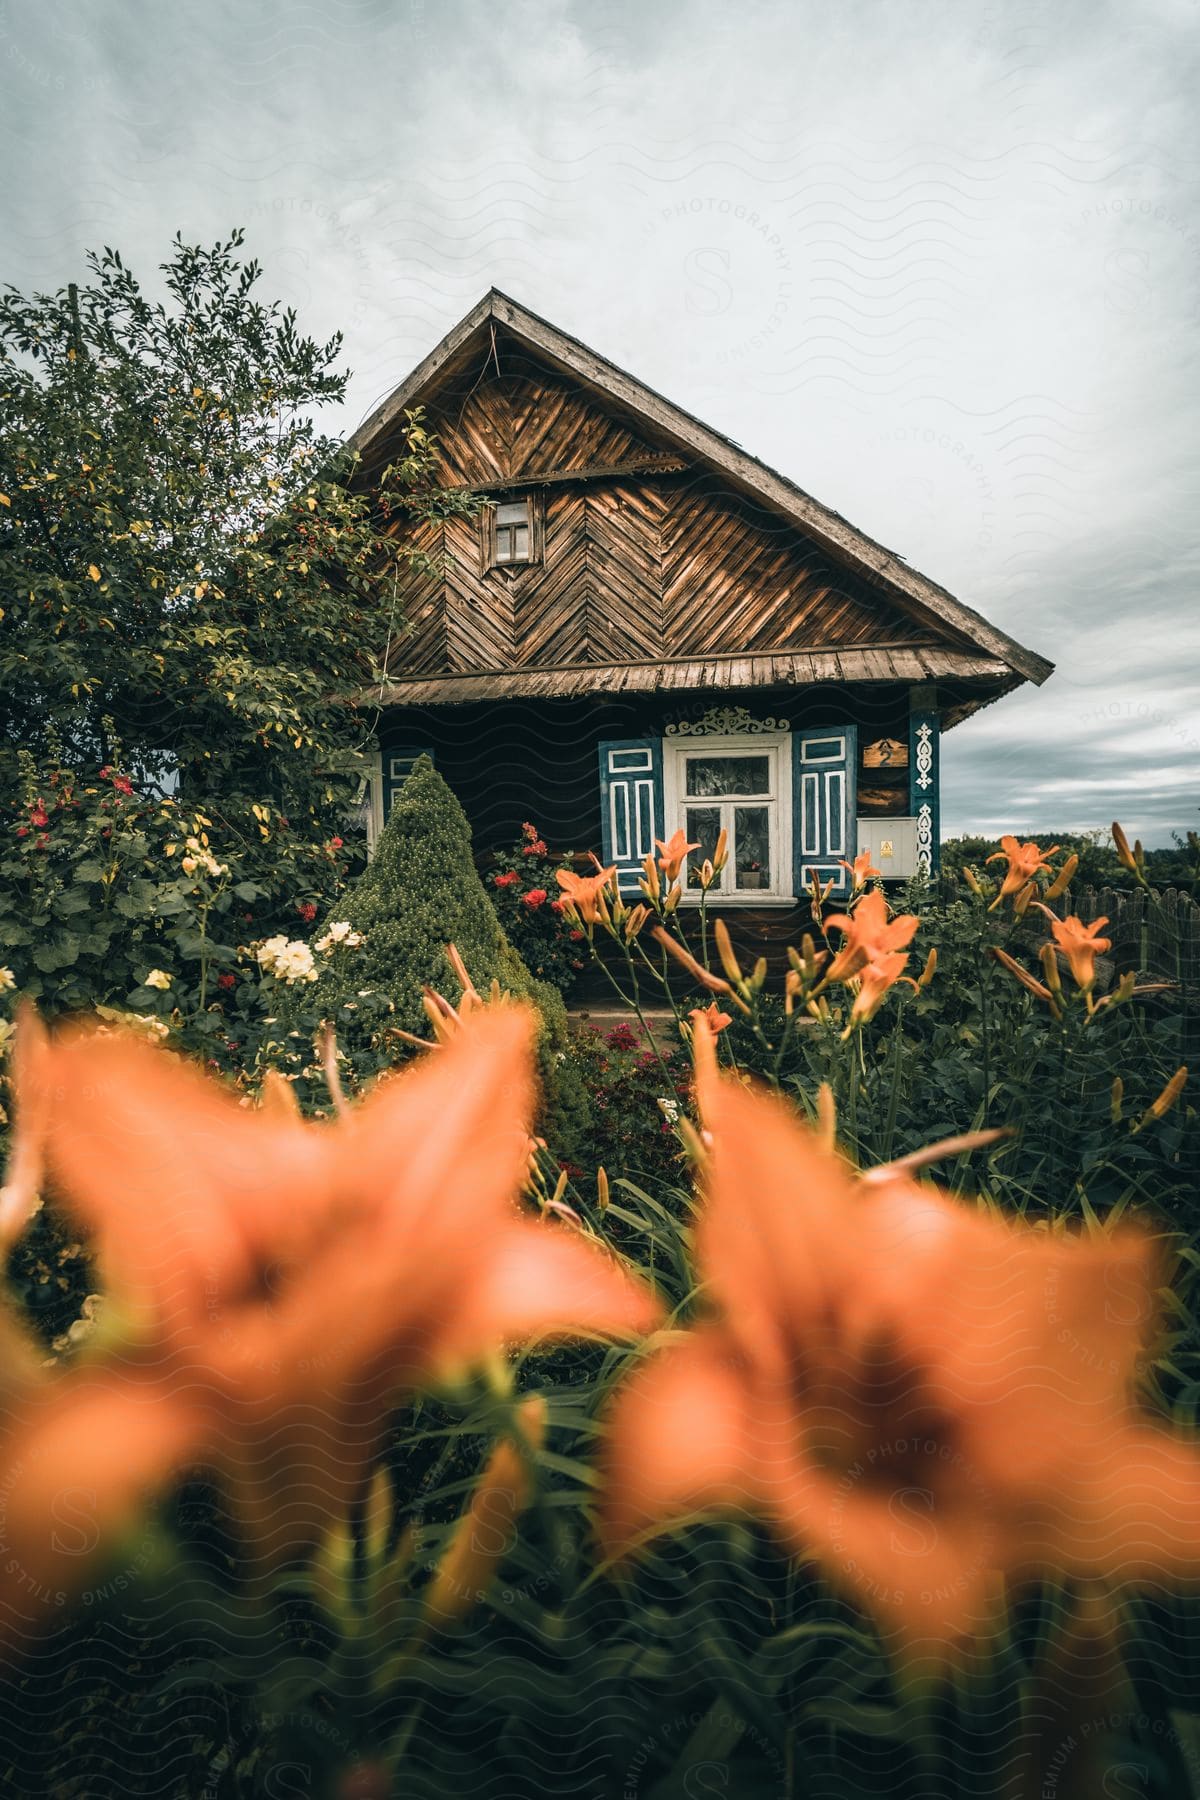 a small, weathered wooden house with a red roof, nestled amongst a variety of colorful flowers and surrounded by tall trees.